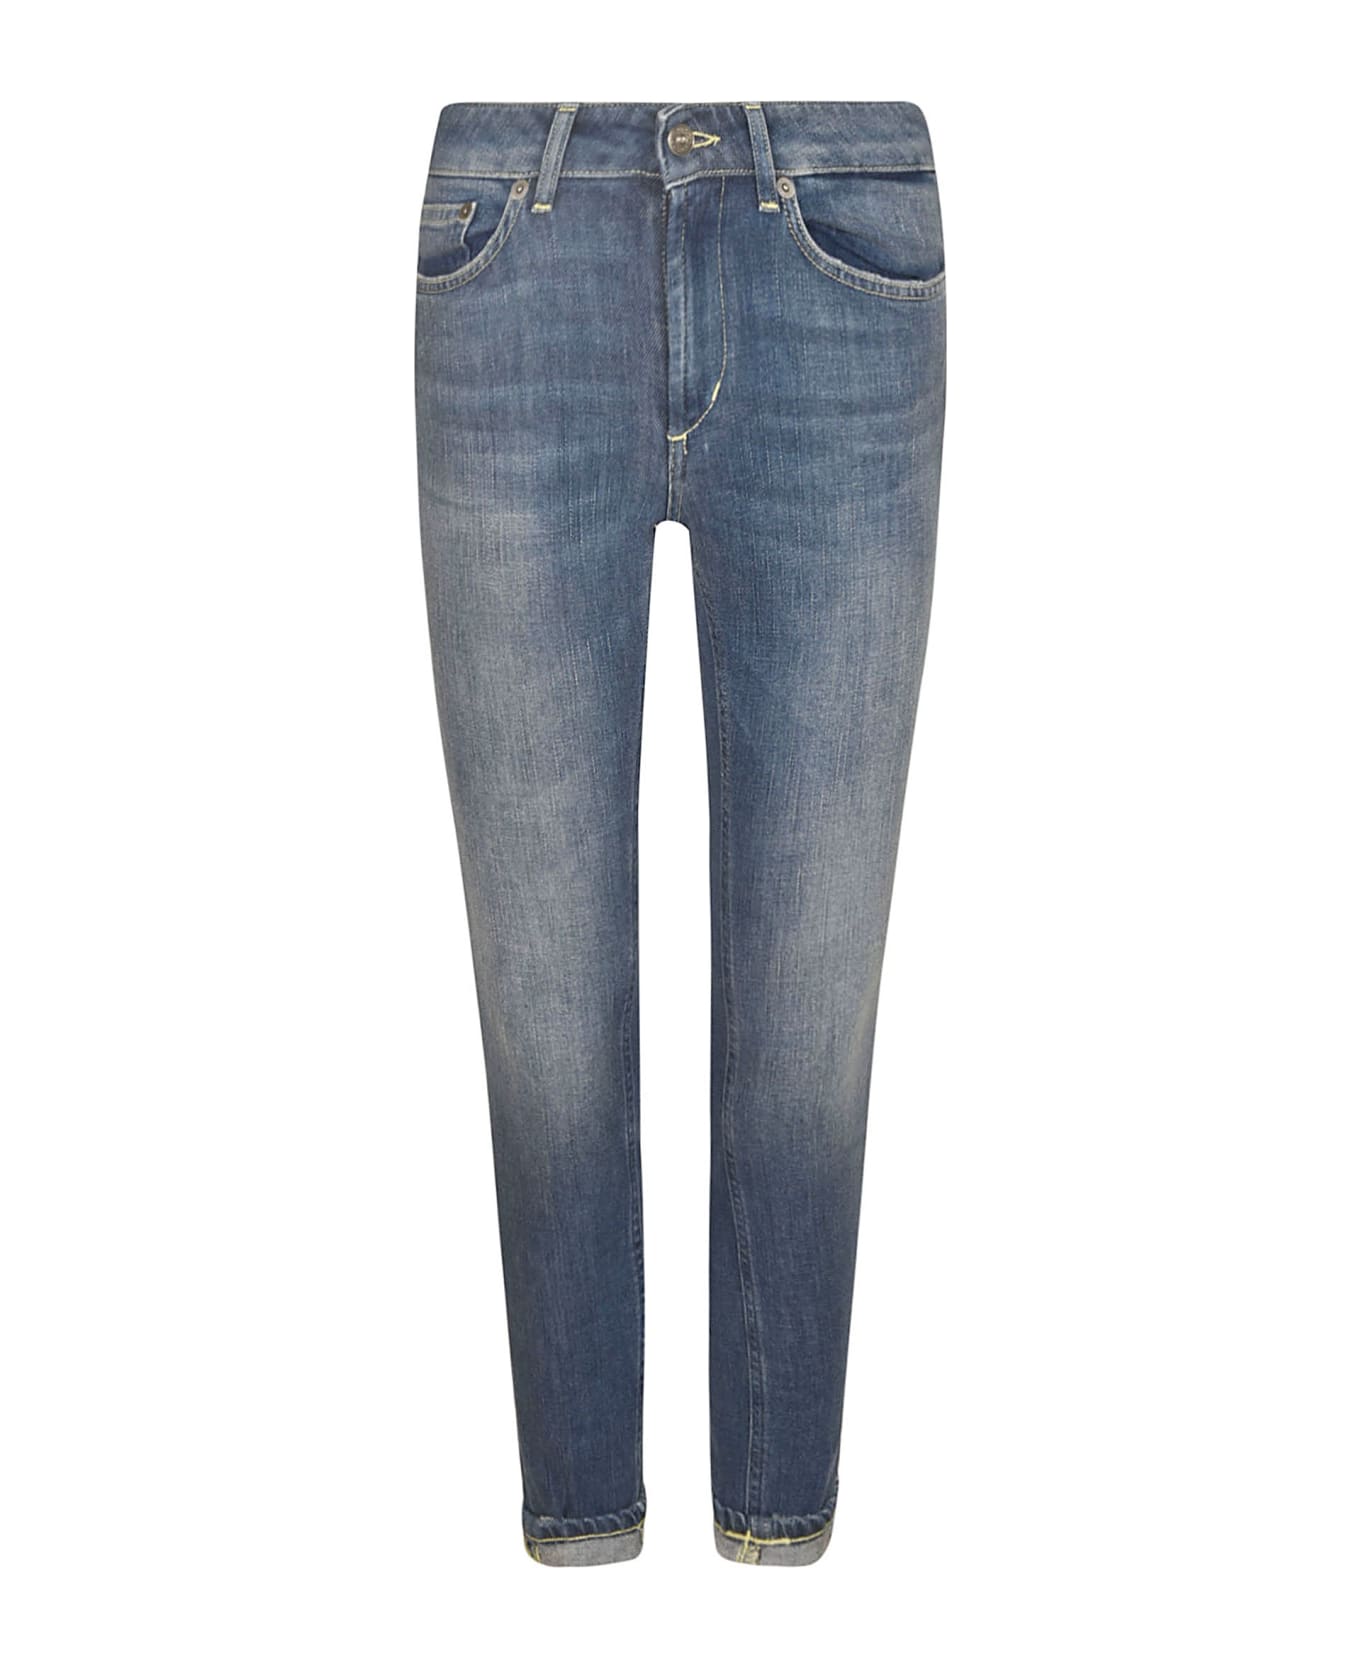 Dondup Skinny Fit Buttoned Jeans - Blue